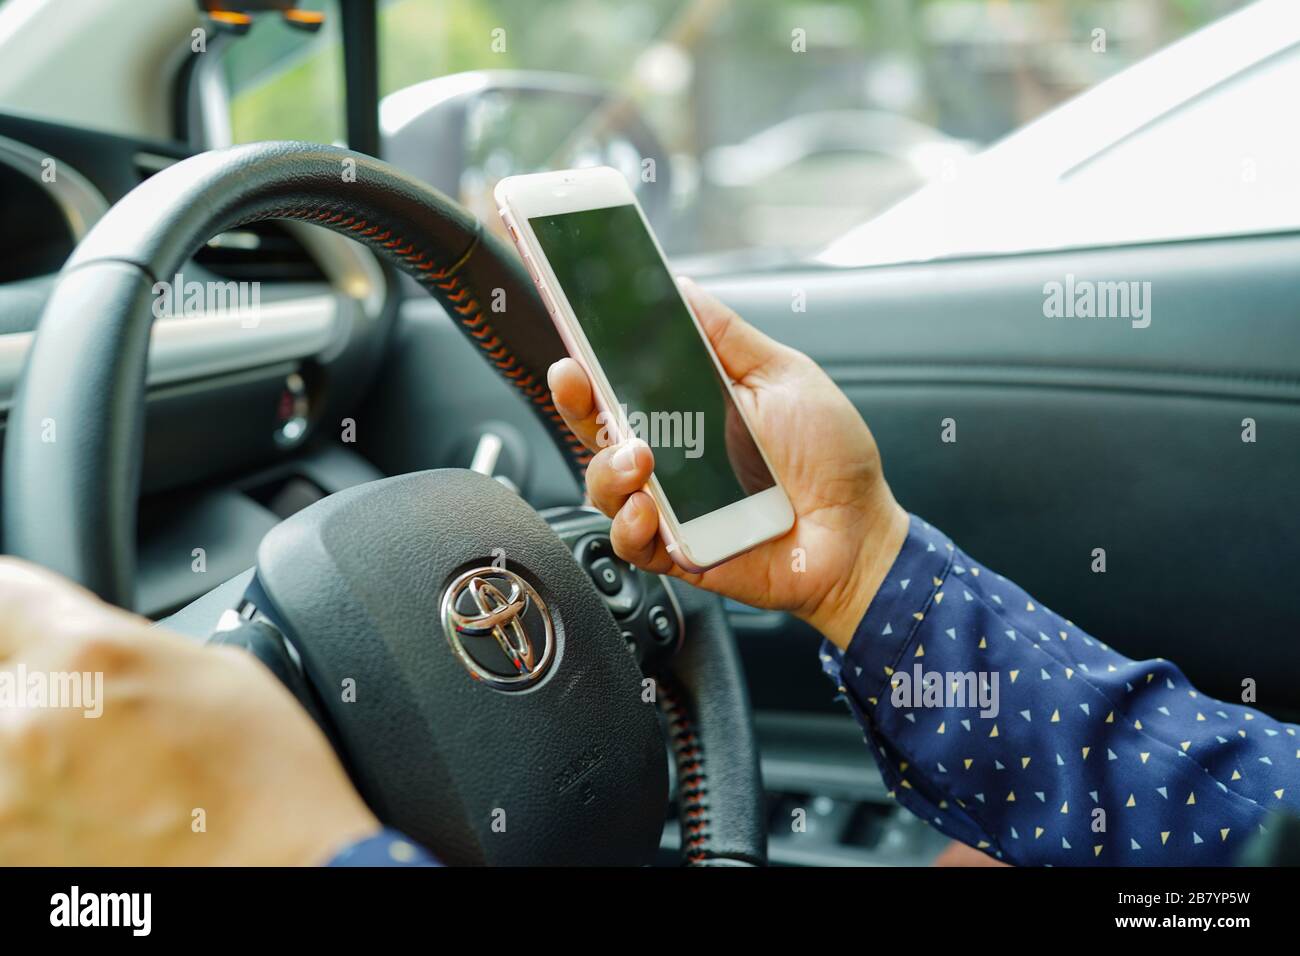 Bangkok, Thailand - February 25, 2019: Holding iPhone in toyota sienta car to communication with family and friends. Stock Photo